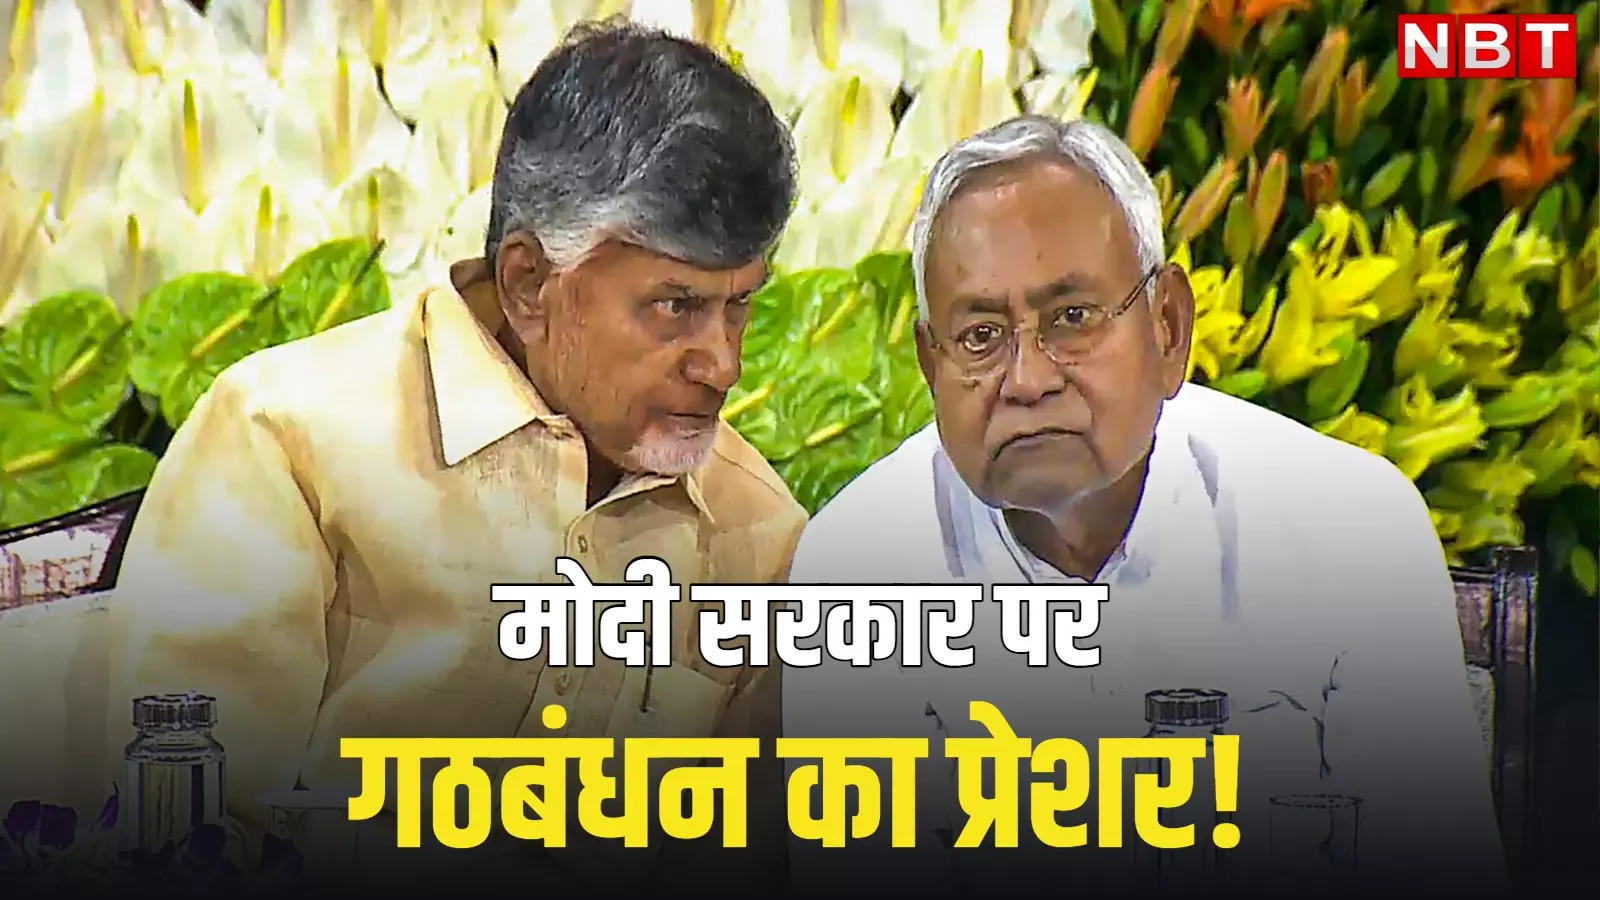 Will Bihar and Andhra get special state status under the pressure of the alliance? Nitish-Chandrababu are batting